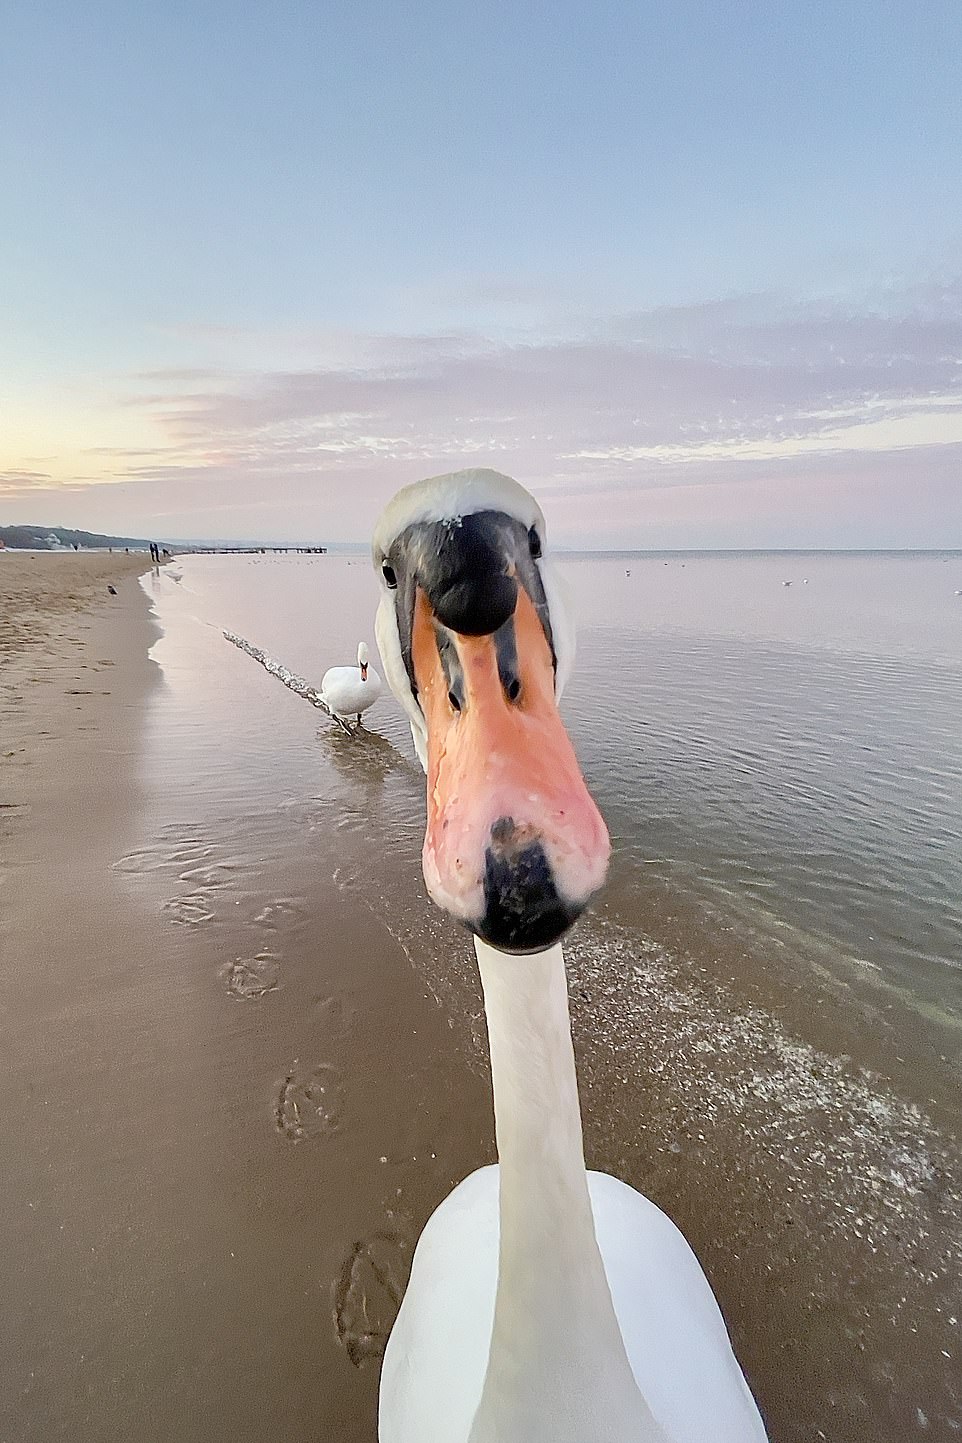 Now that's a selfie by Jaroslaw Kolacz from Poland: 'Swan on the beach was very interested in me'